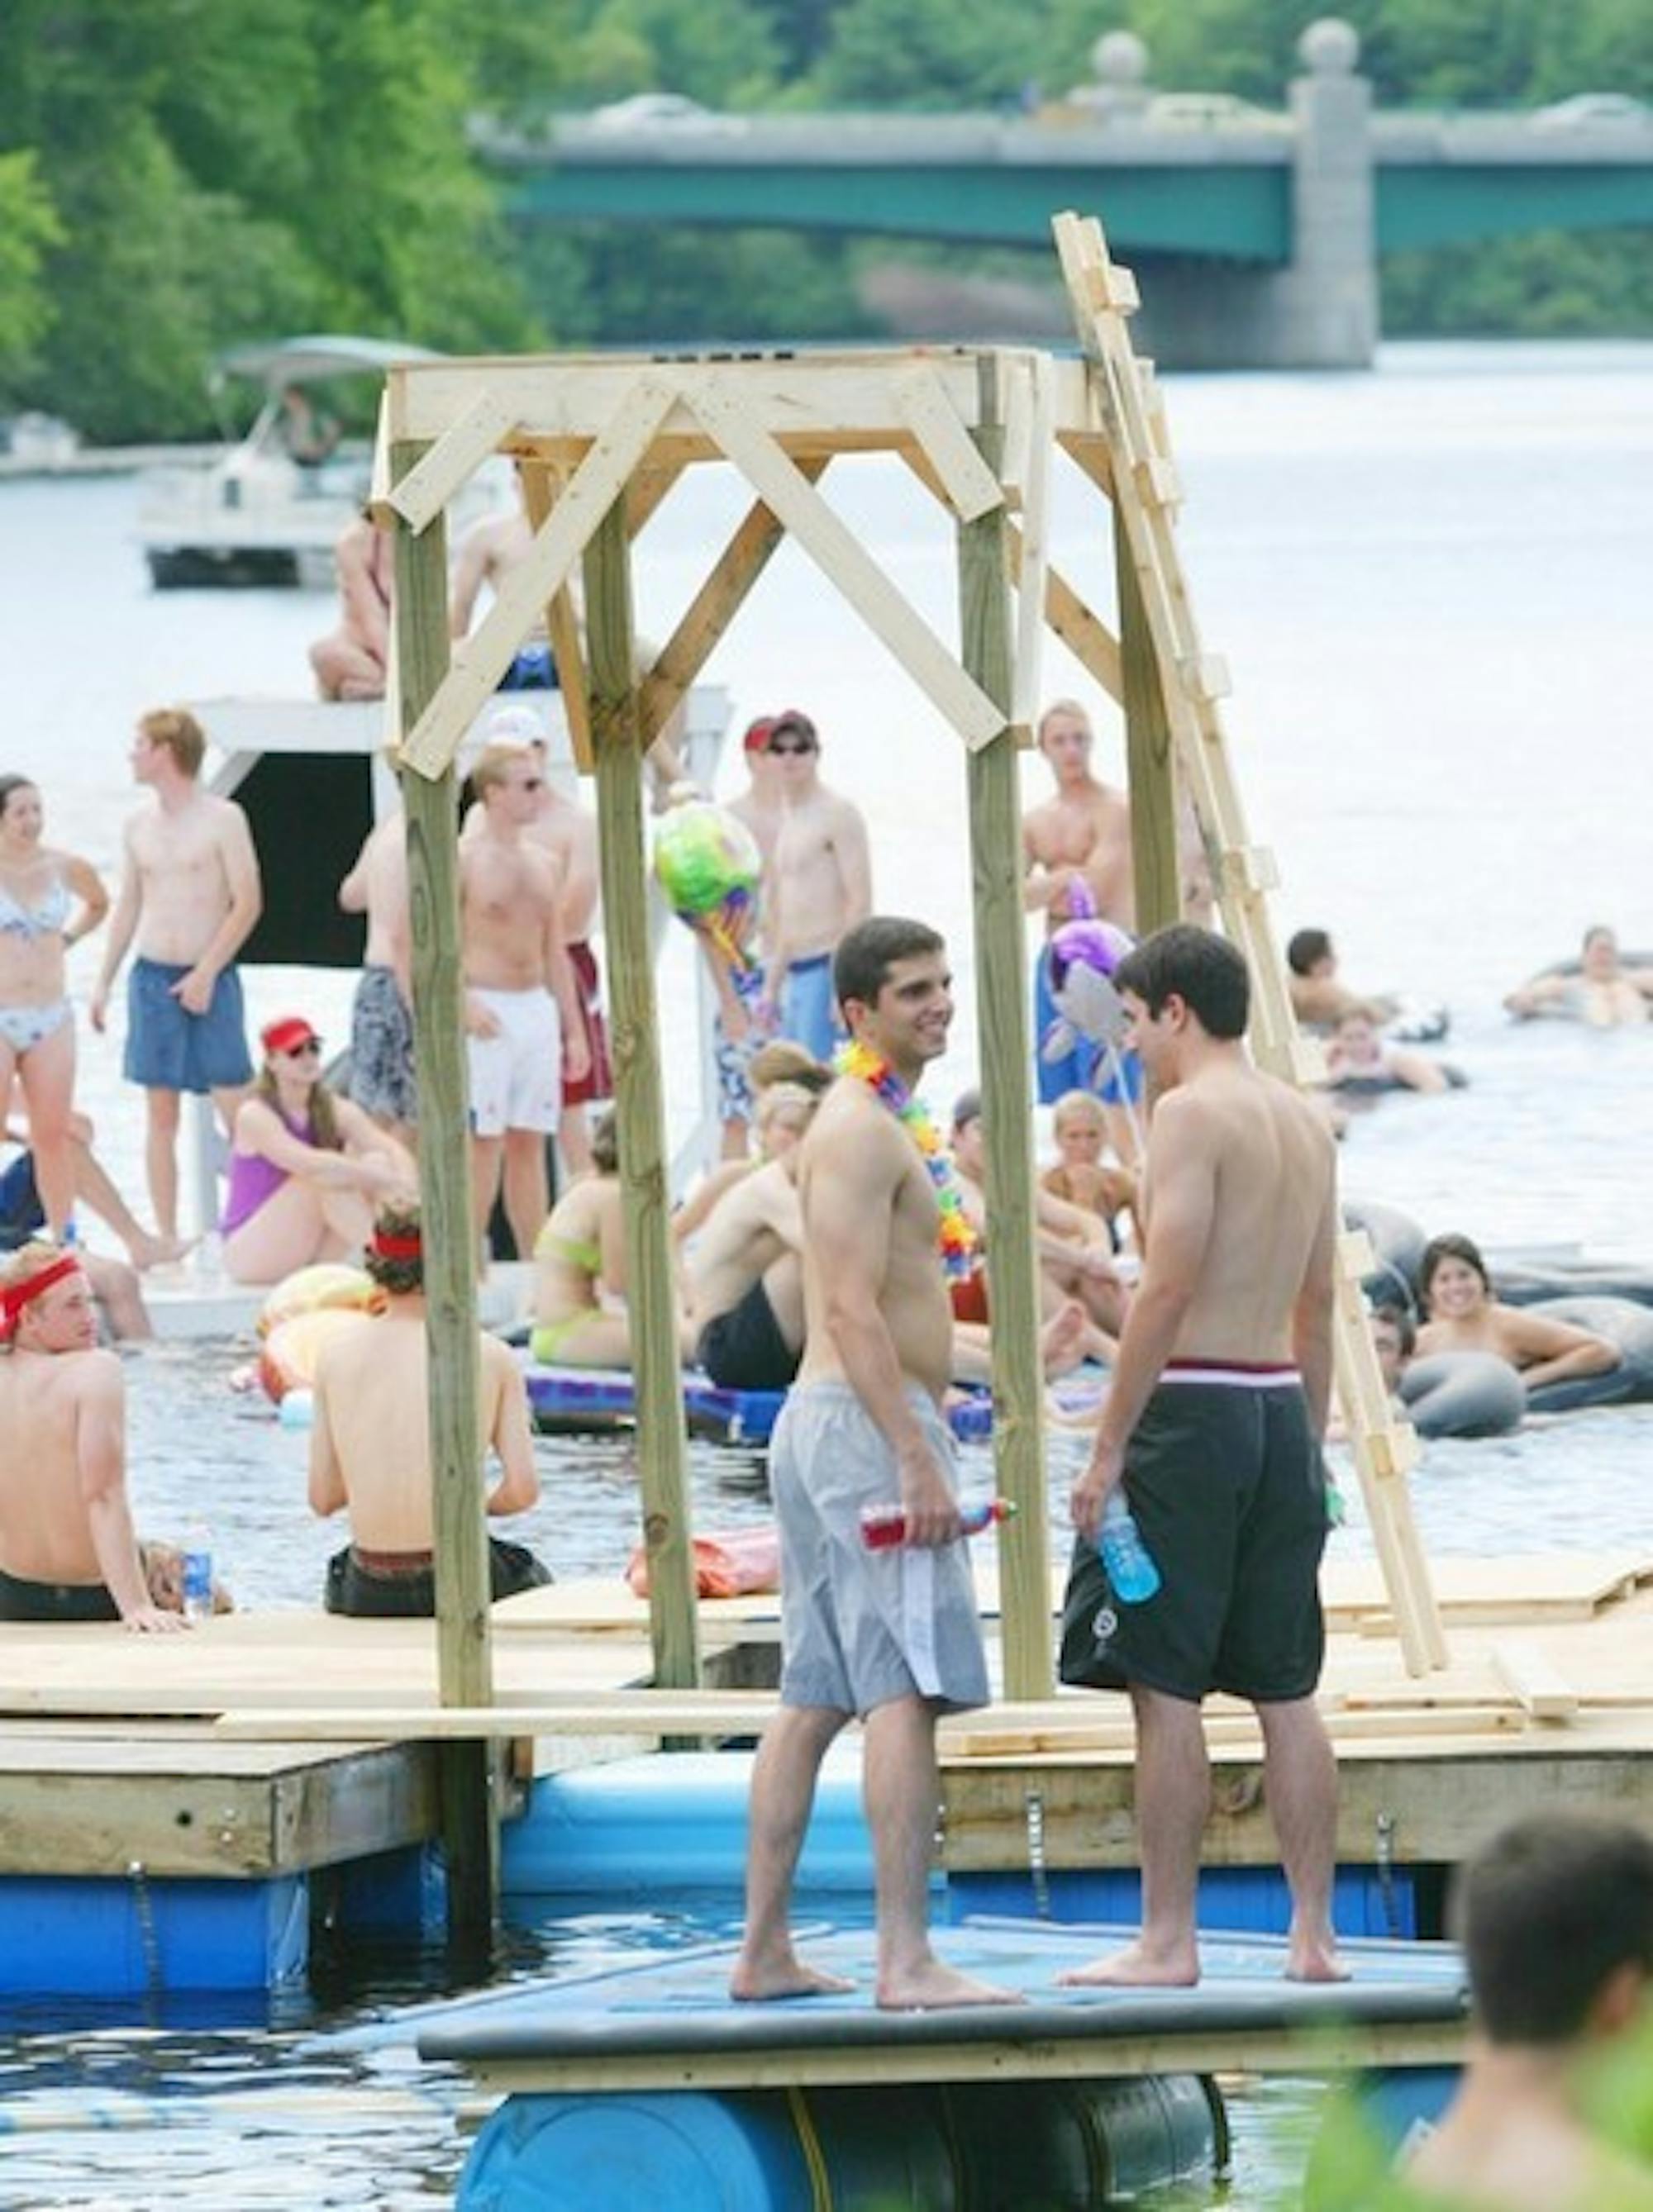 Members of the Class of 2006 enjoy a day of revelry on the Connecticut river during Tubestock, a holiday during sophomore summer. The future of this tradition is being threatened by concerned citizens of Hanover.